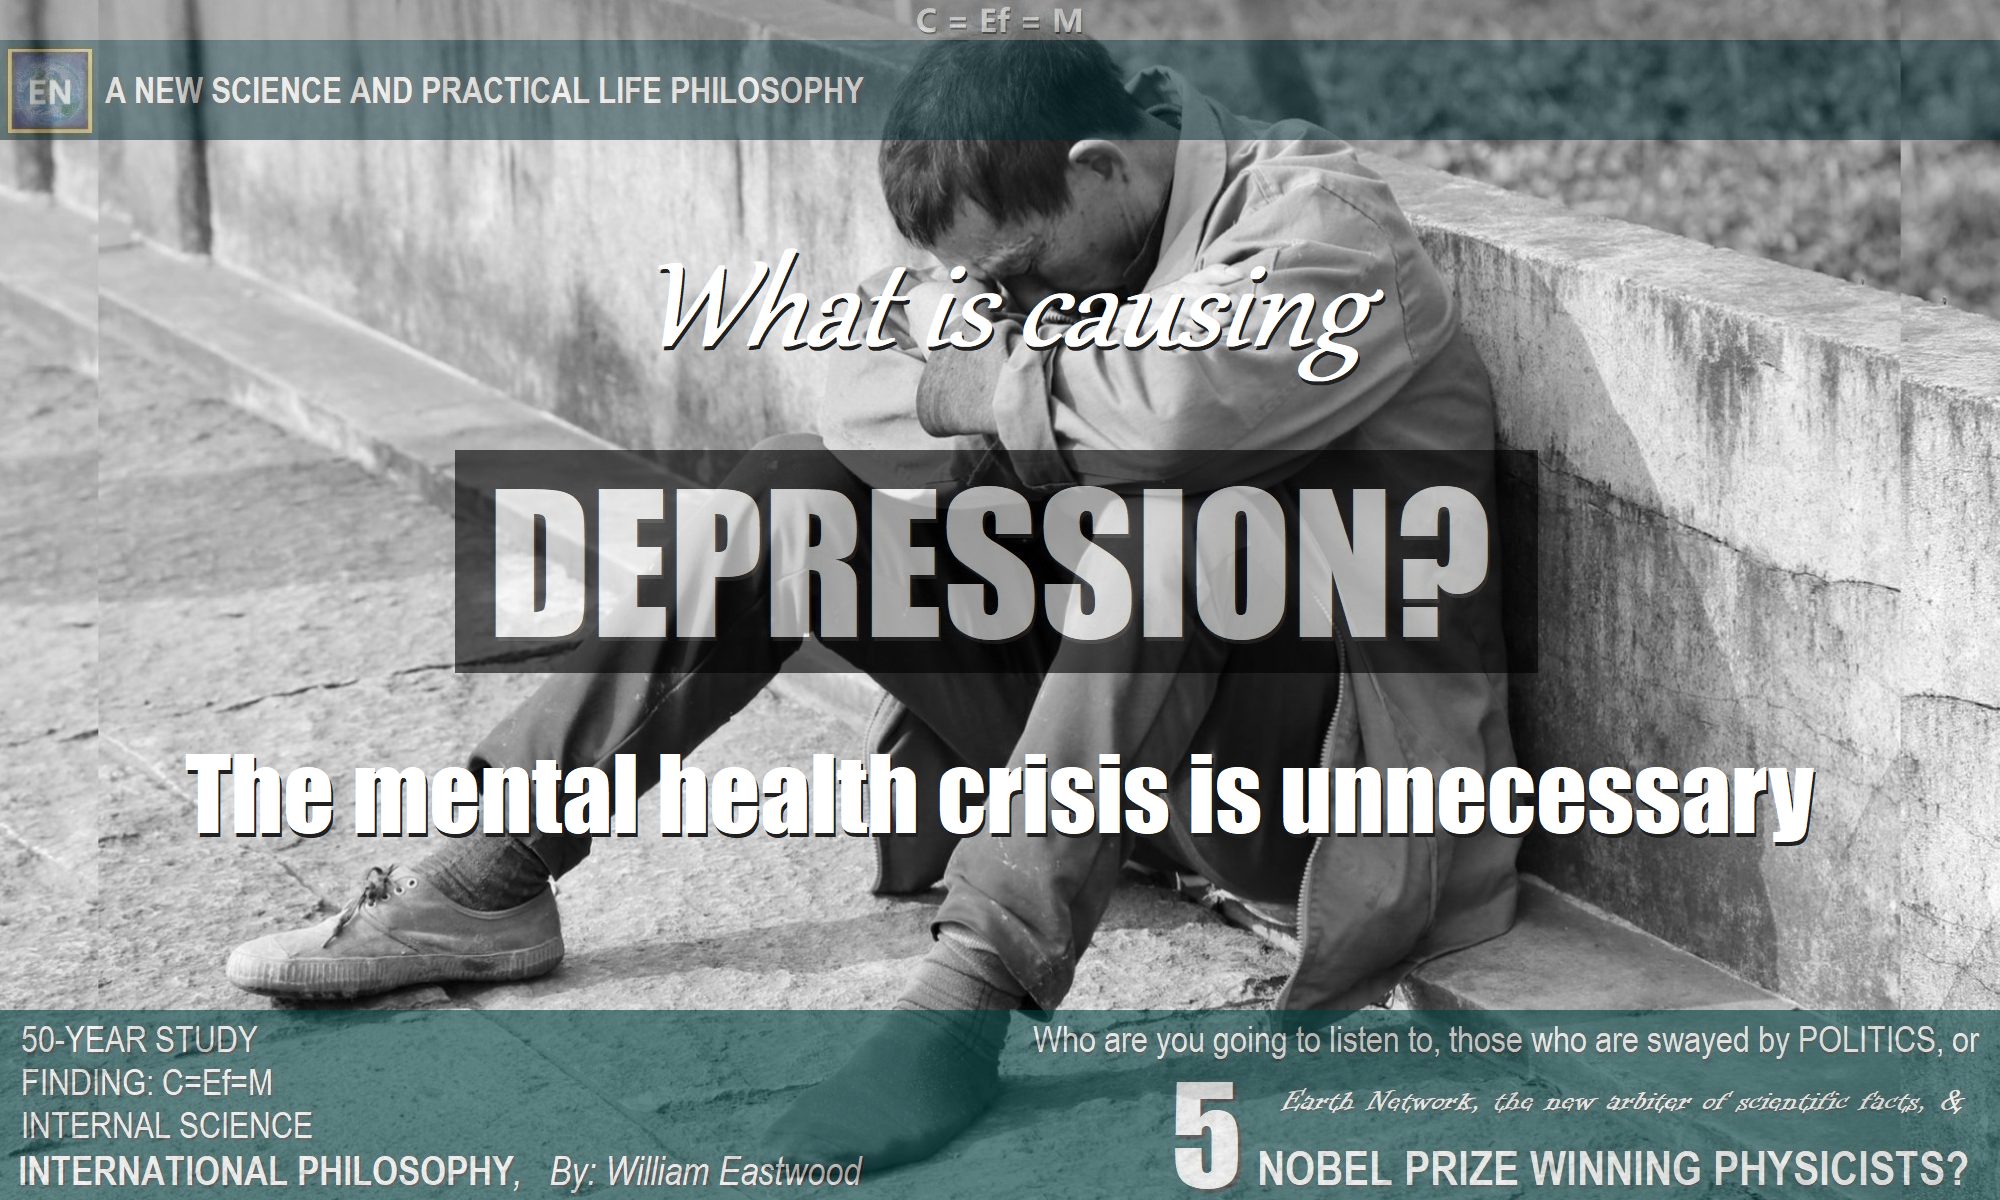 What is Causing Depression & Suicide in Children, Teens Adults? Why Are We Unhappy? The mental health crisis is unnecessary.